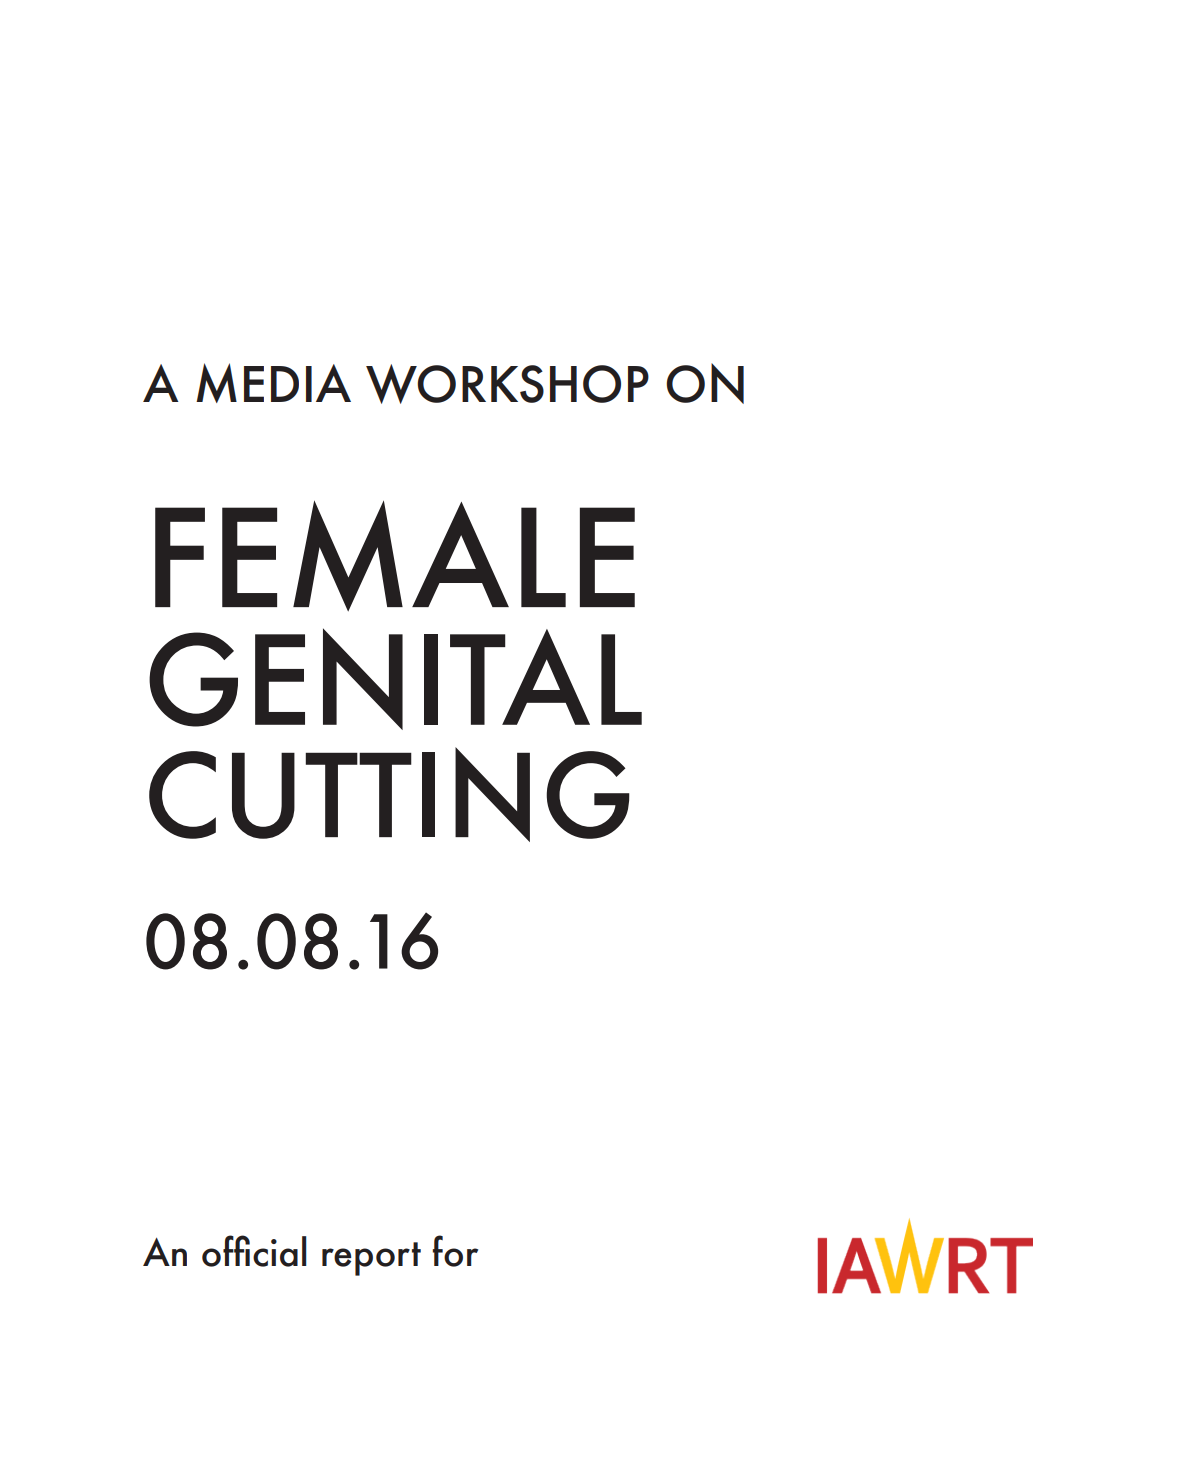 This image for A Media Workshop on Female Genital Cutting